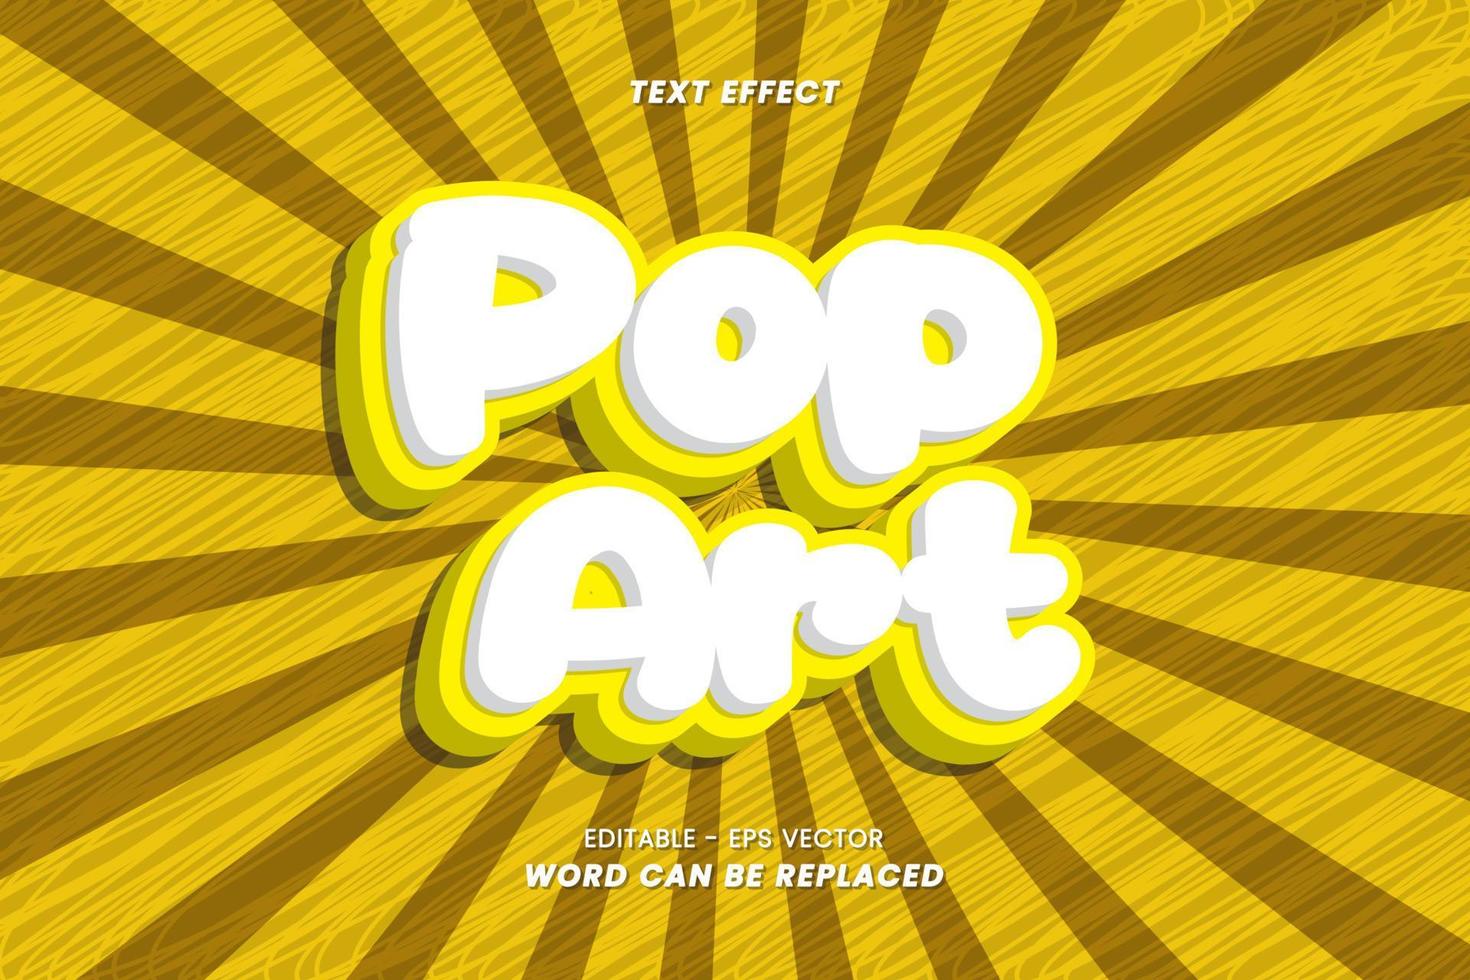 Text Effect - Pop Art Words with Retro Theme, Text Can be changed via Using Effects in Graphic Style settings. vector